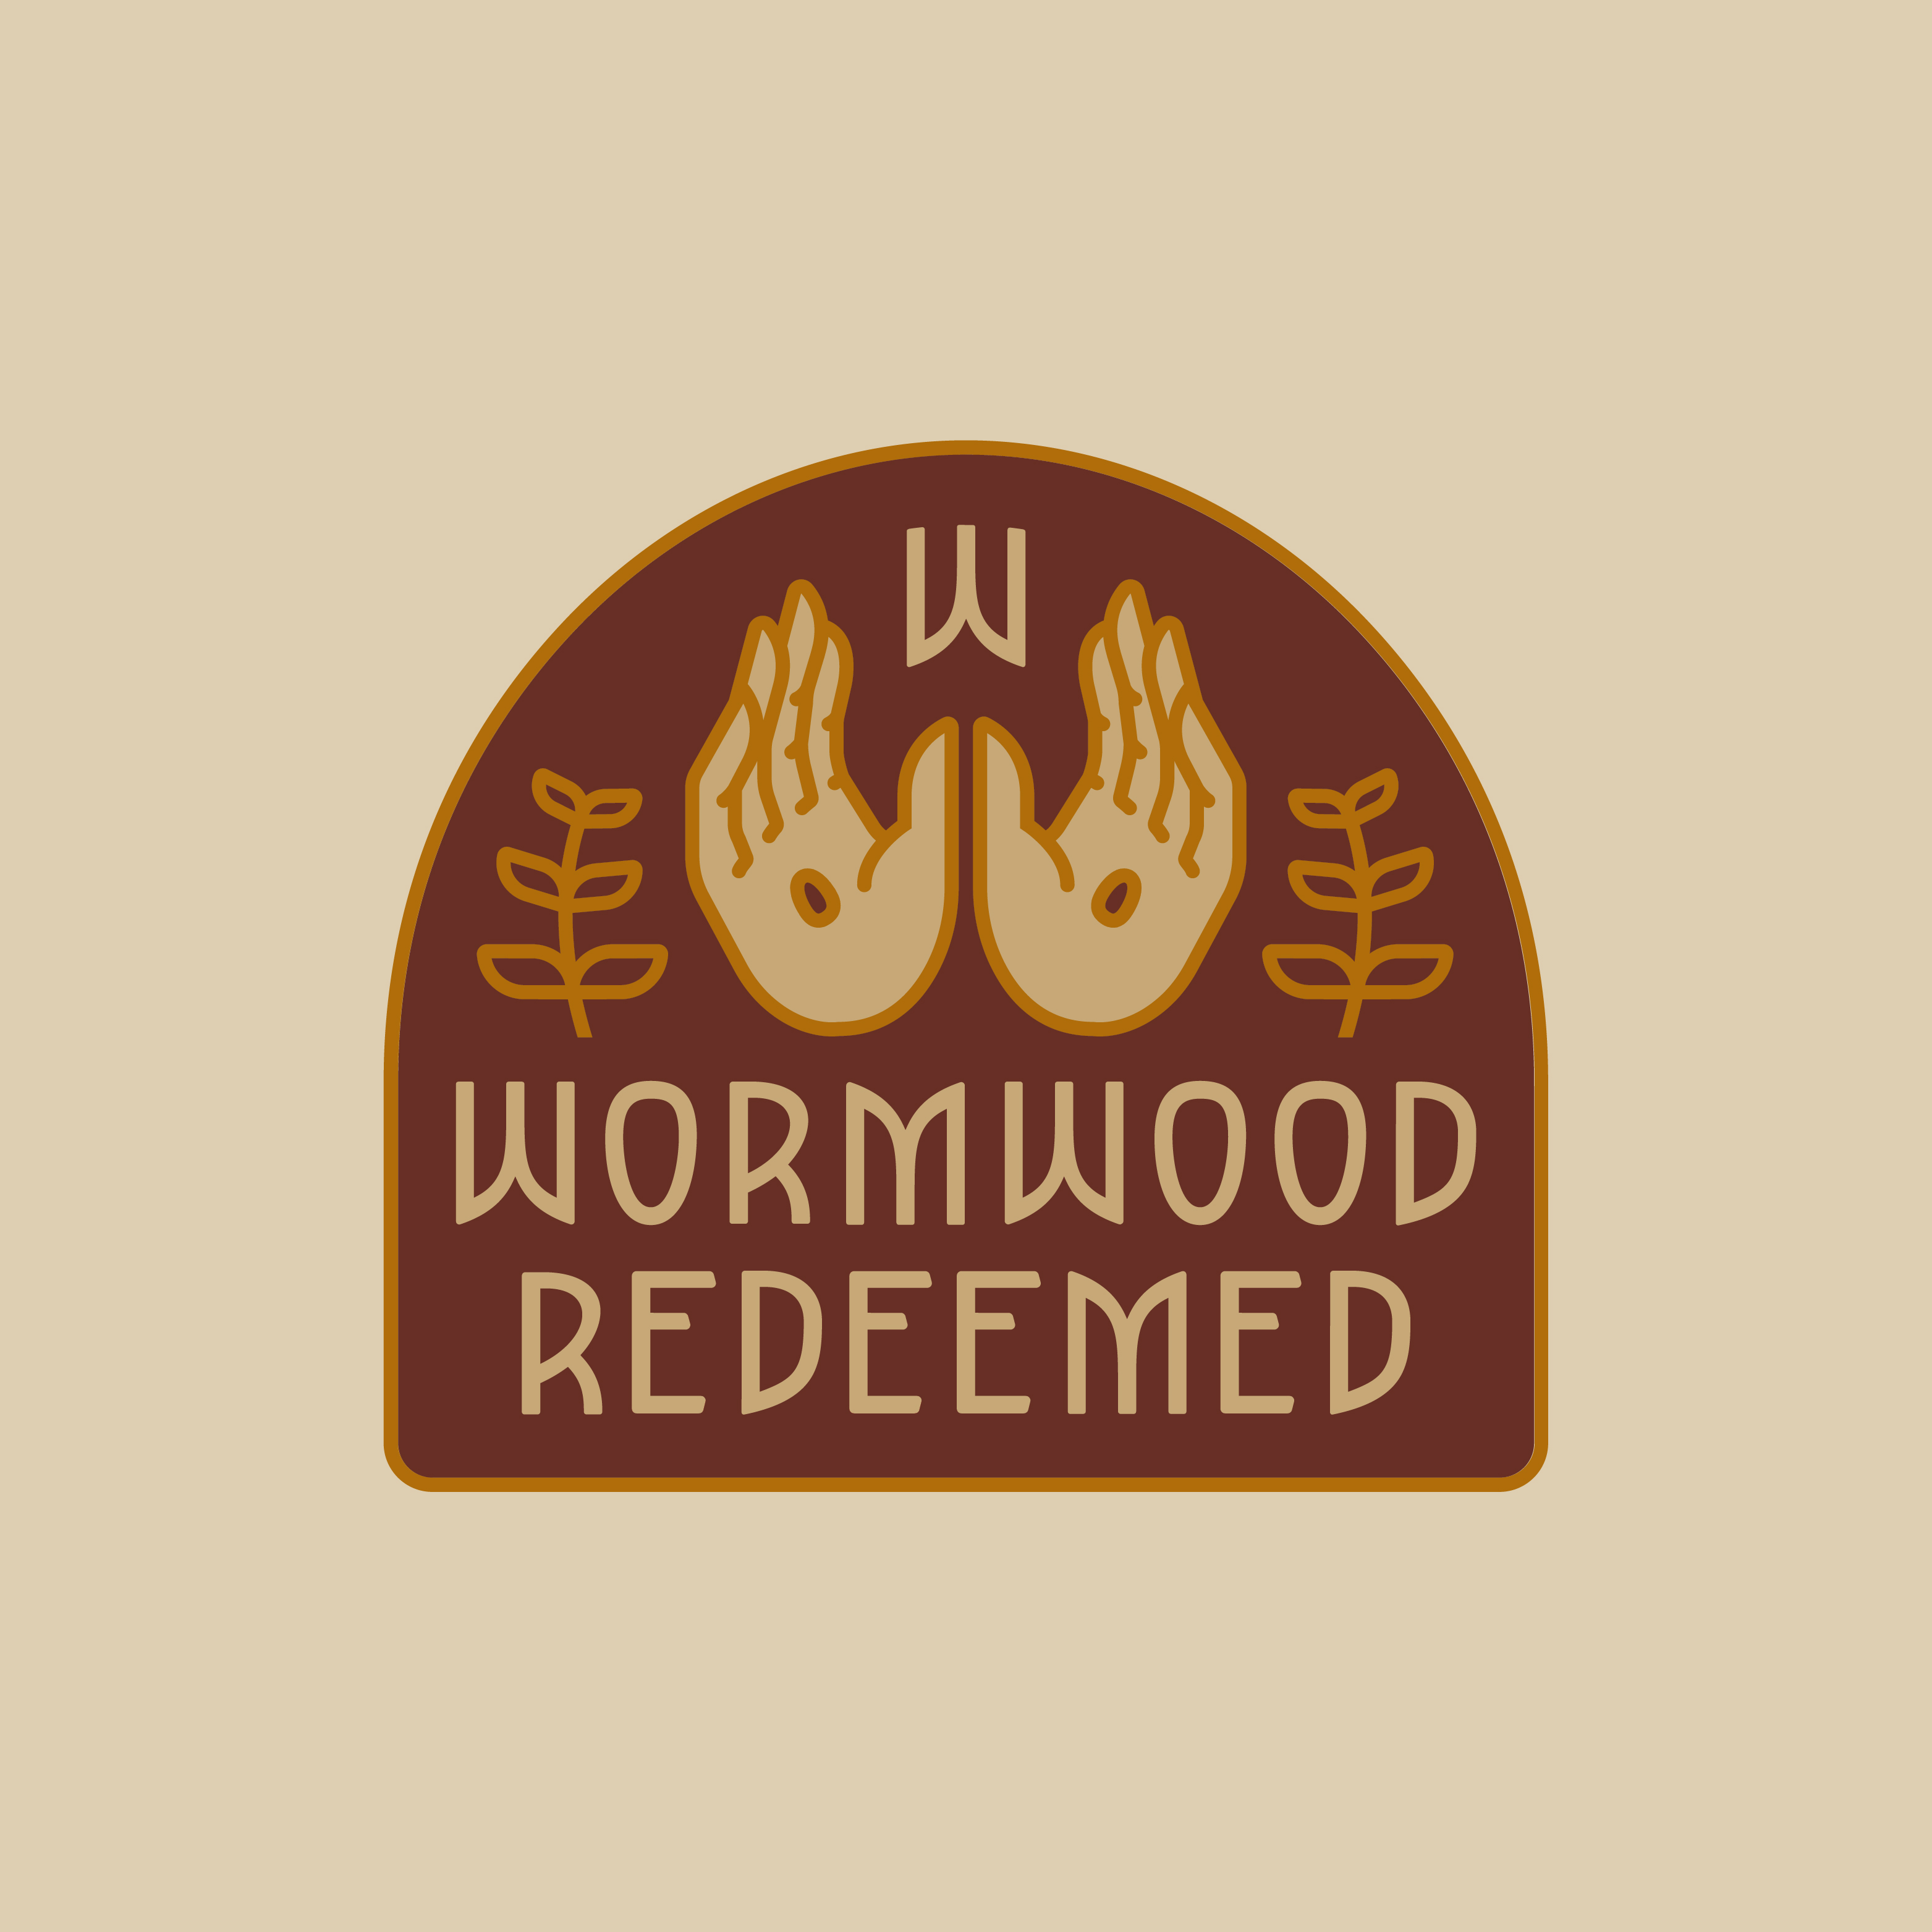 Wormwood Redeemed logo design by Hunter Oden of oden.house